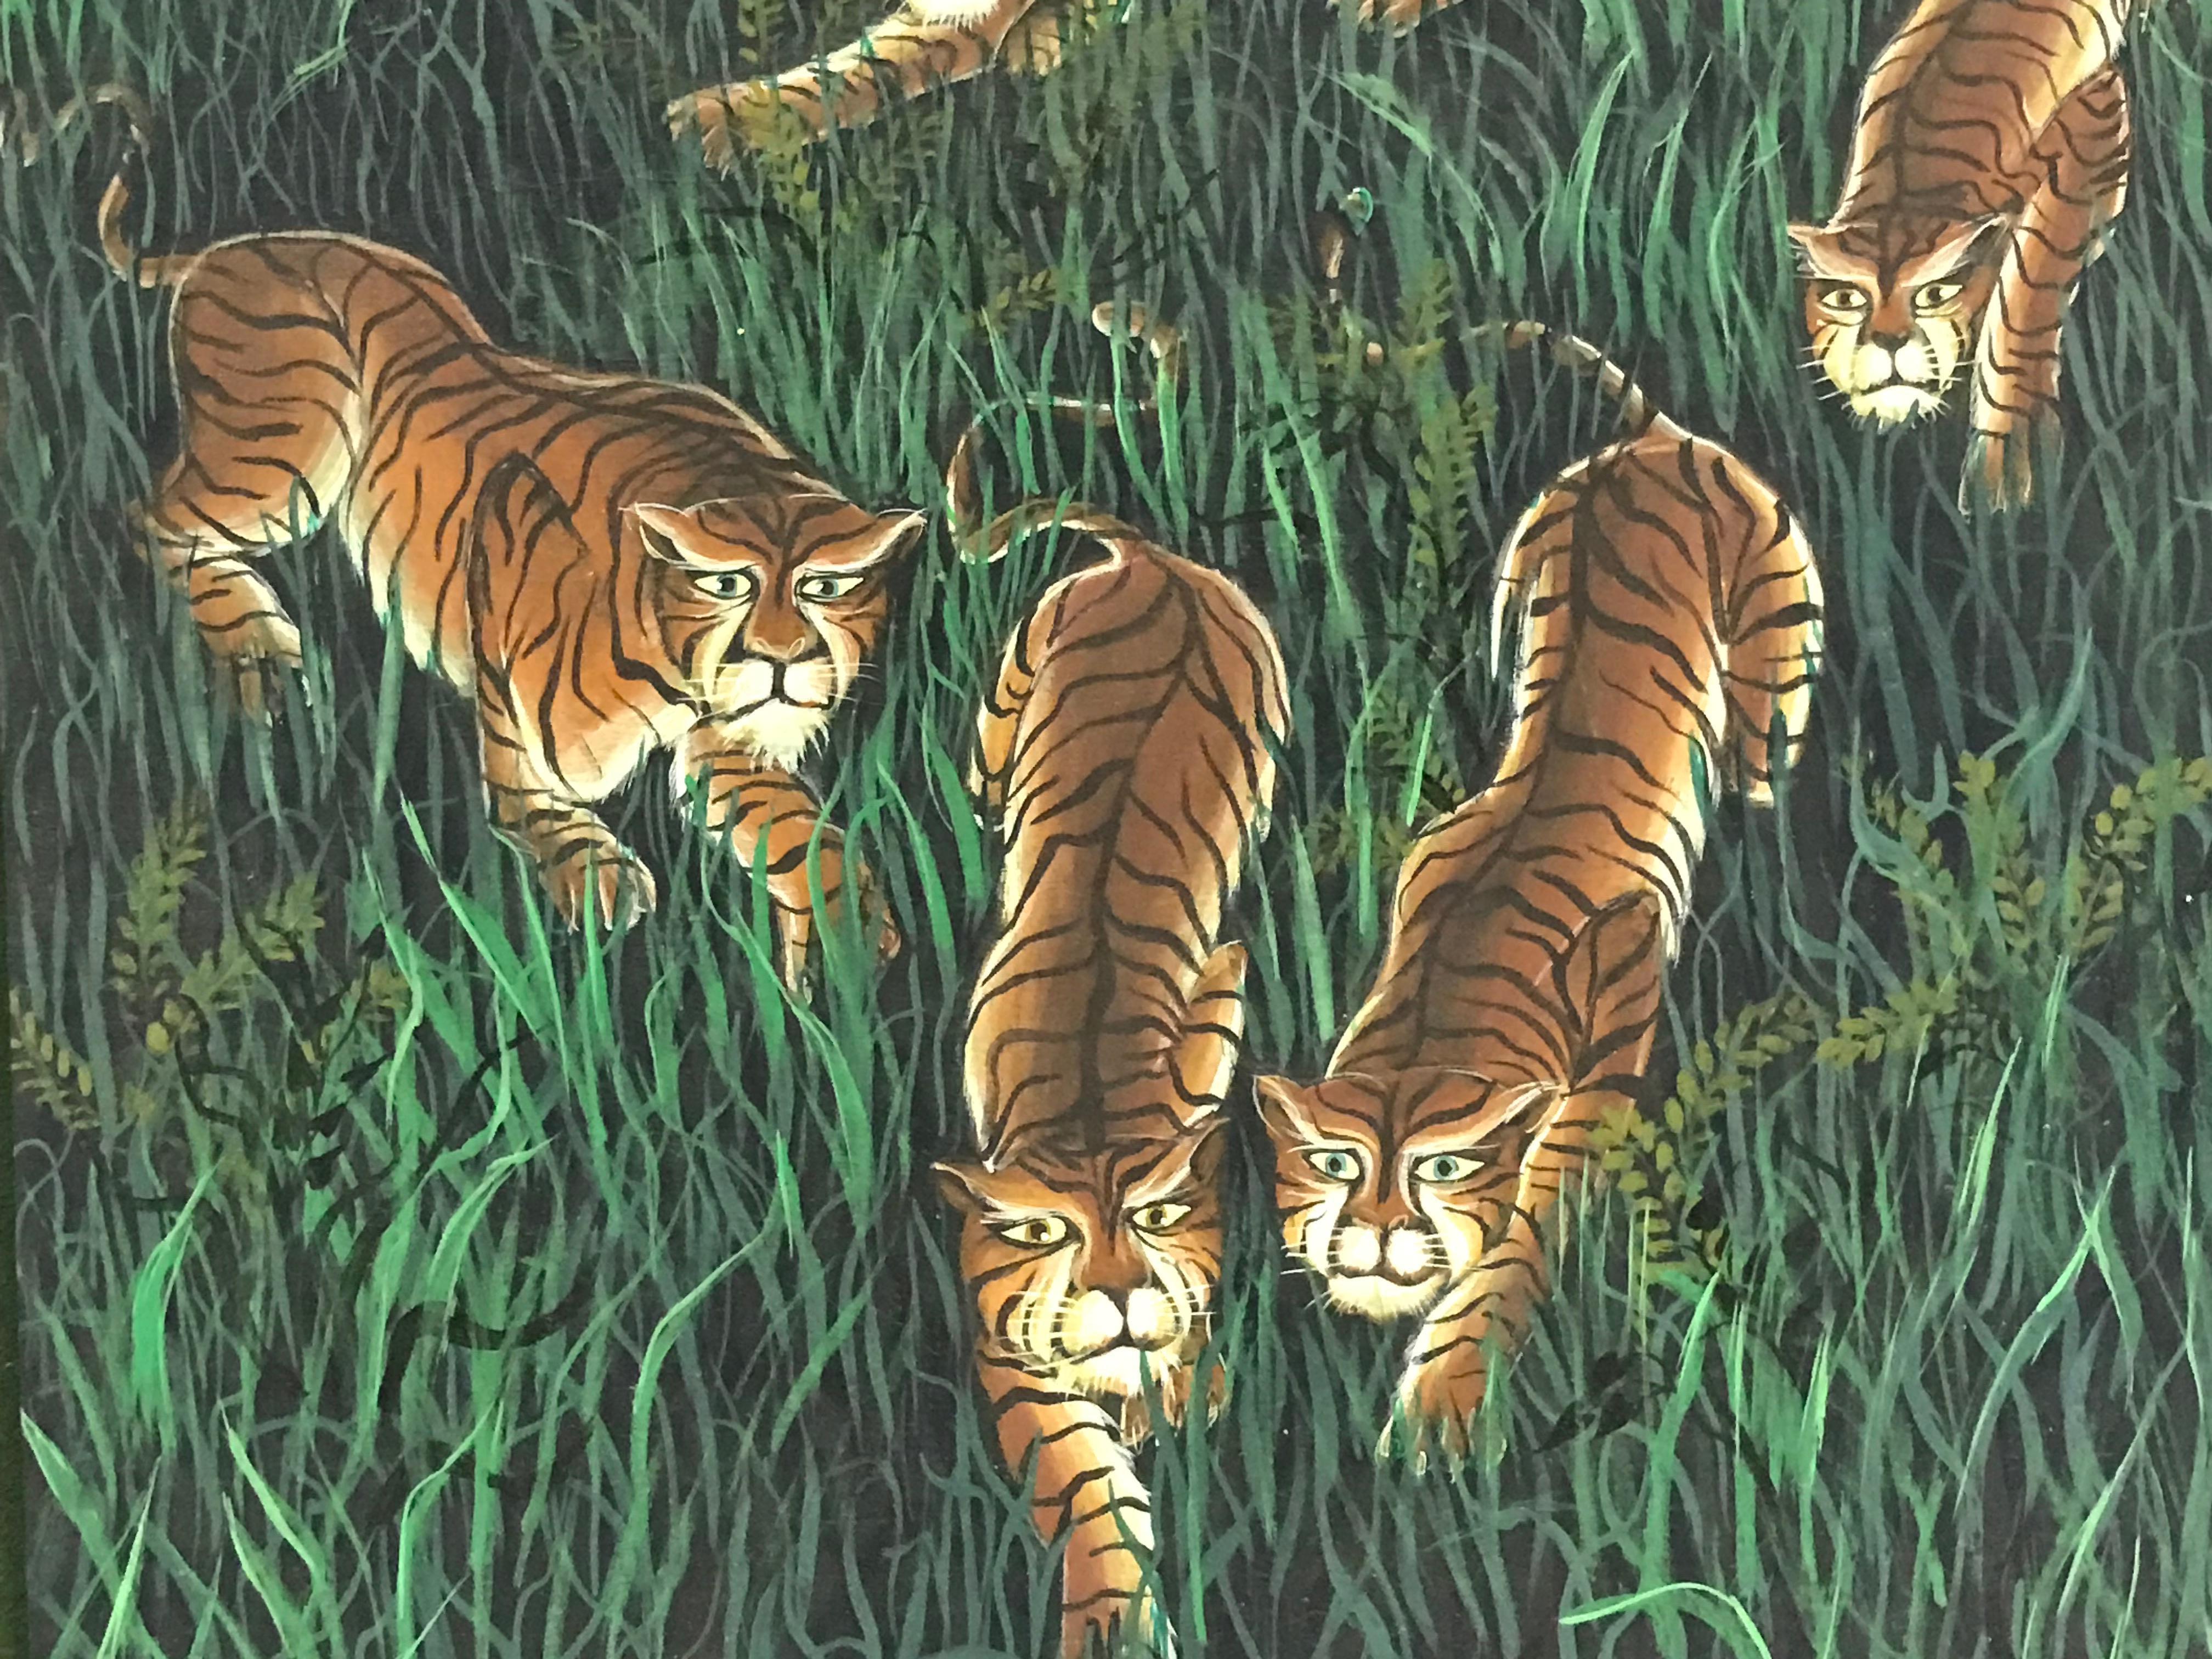 Mid-Century Modern Gustavo Novoa Early 1960s Modern Naive Oil/Board Painting of a Group of Tigers